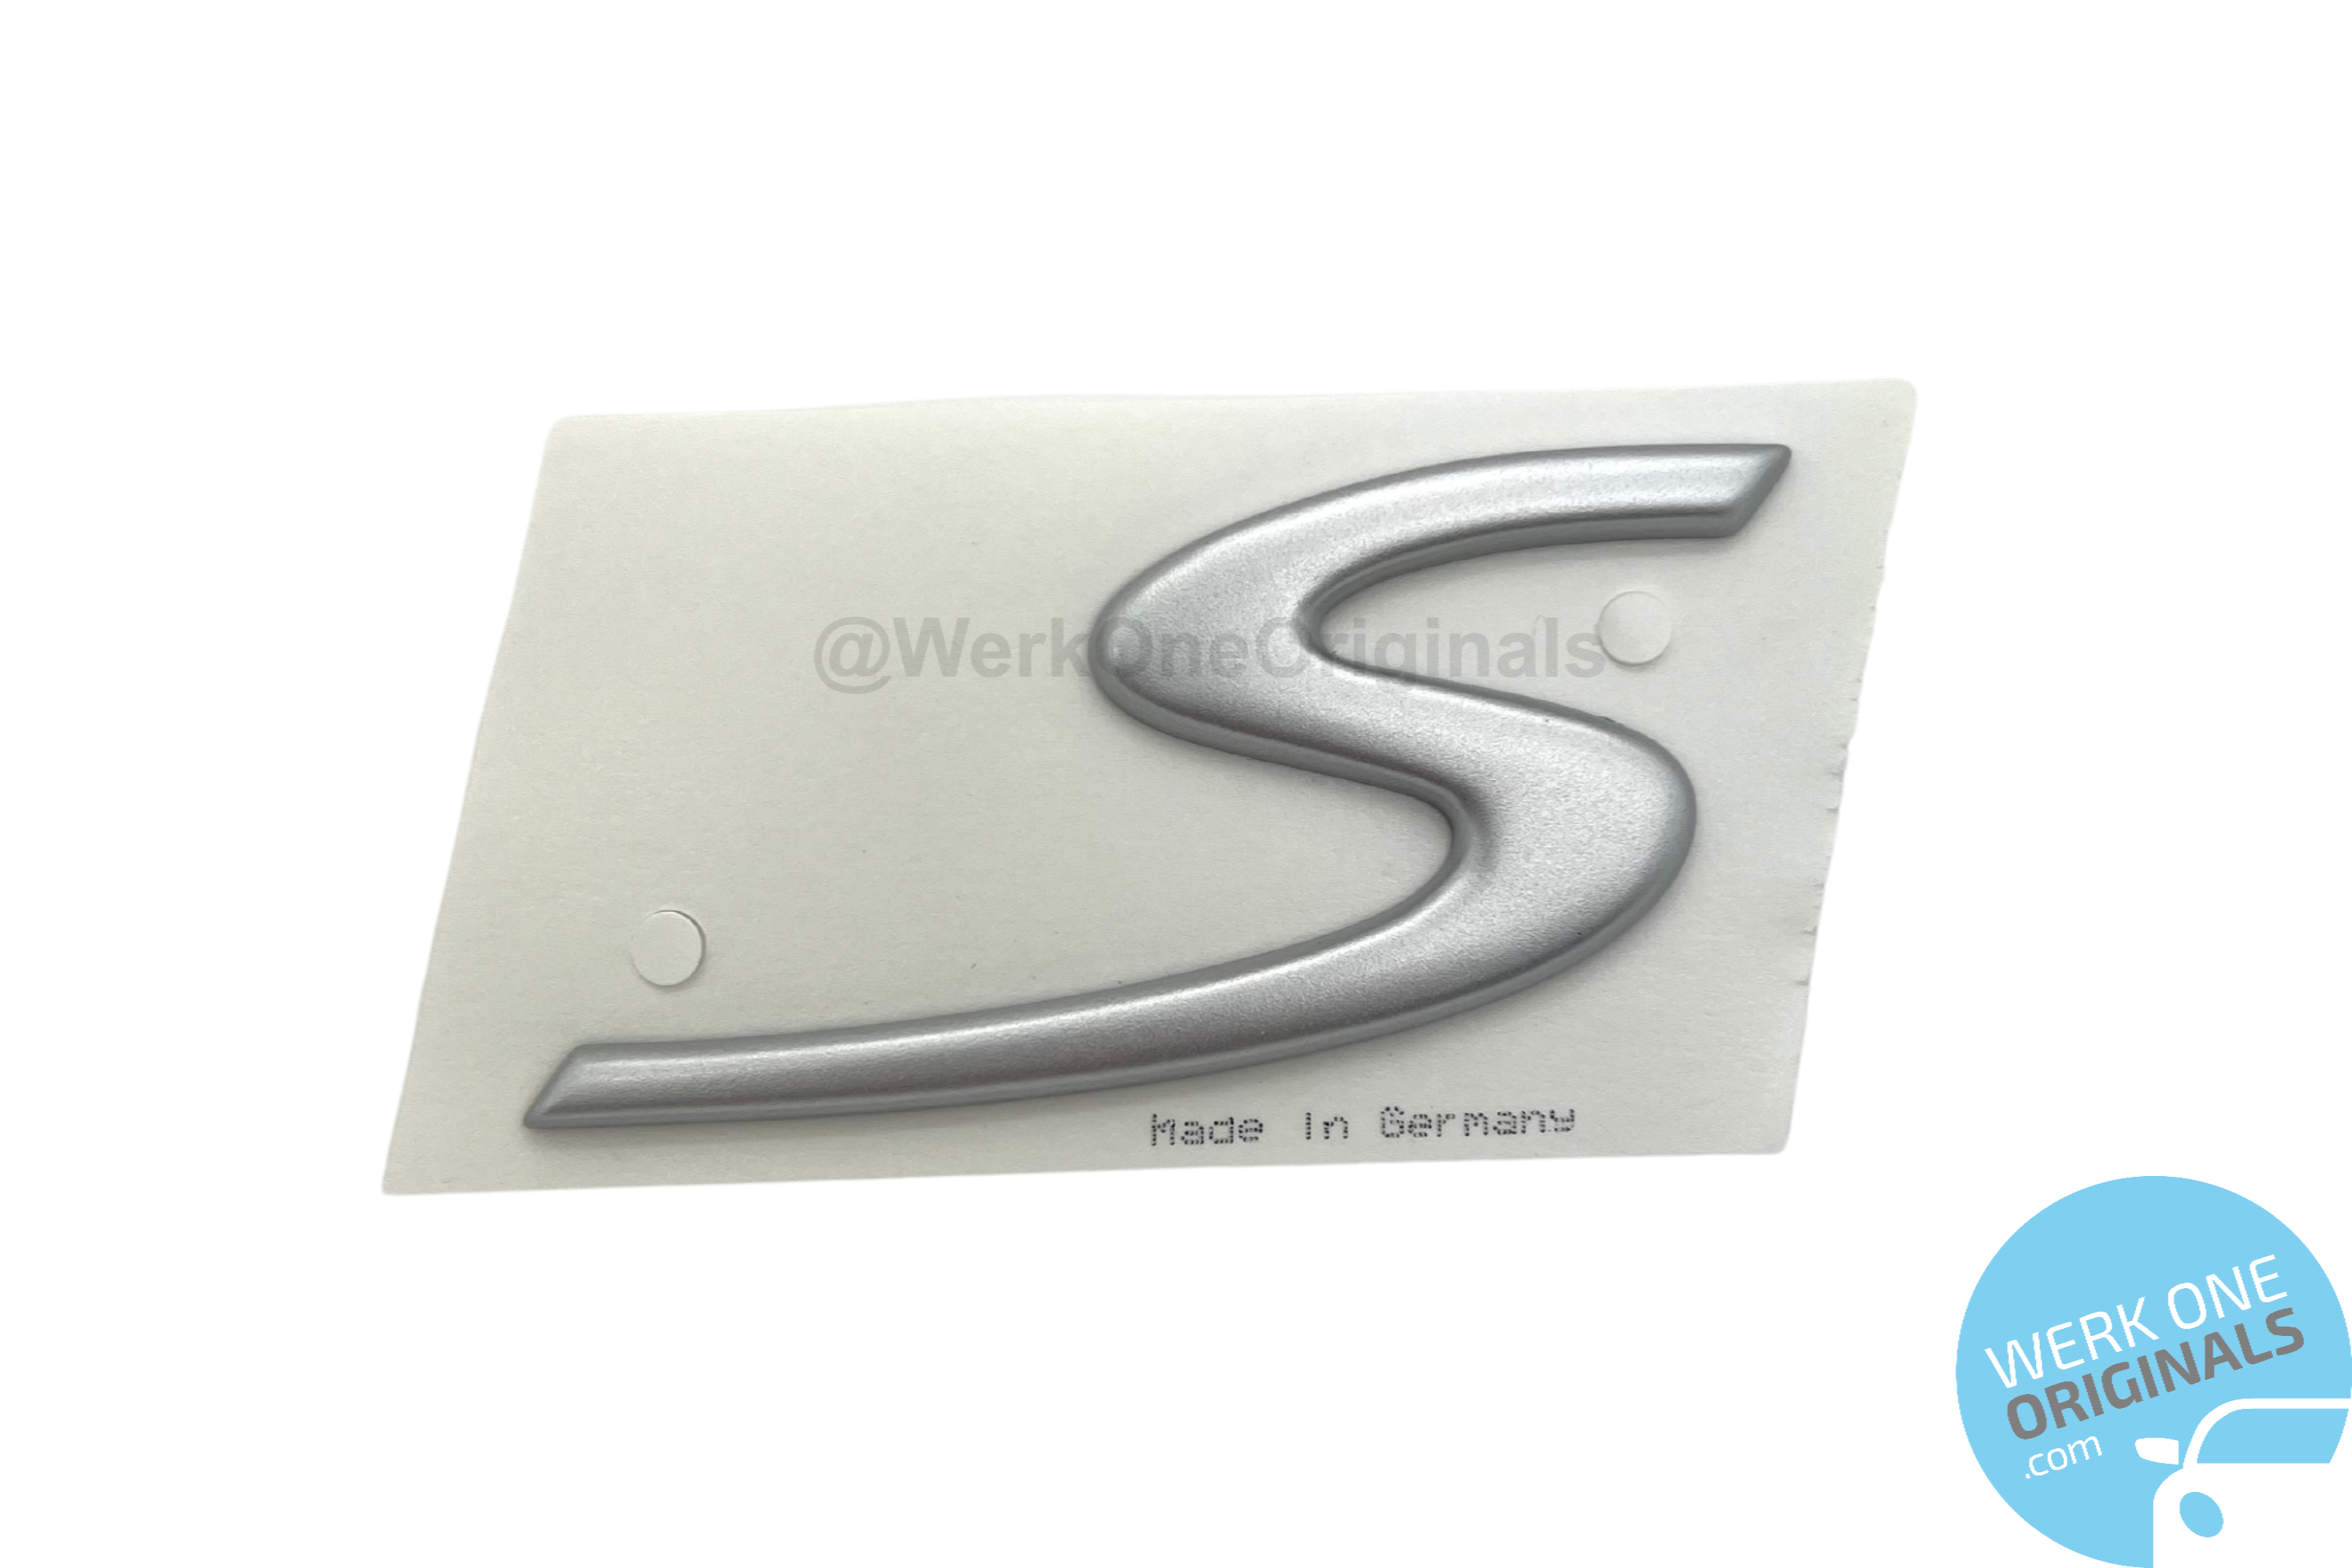 Porsche 'S' Rear Badge Decal in Matte Silver for Cayman S Type 987 Models